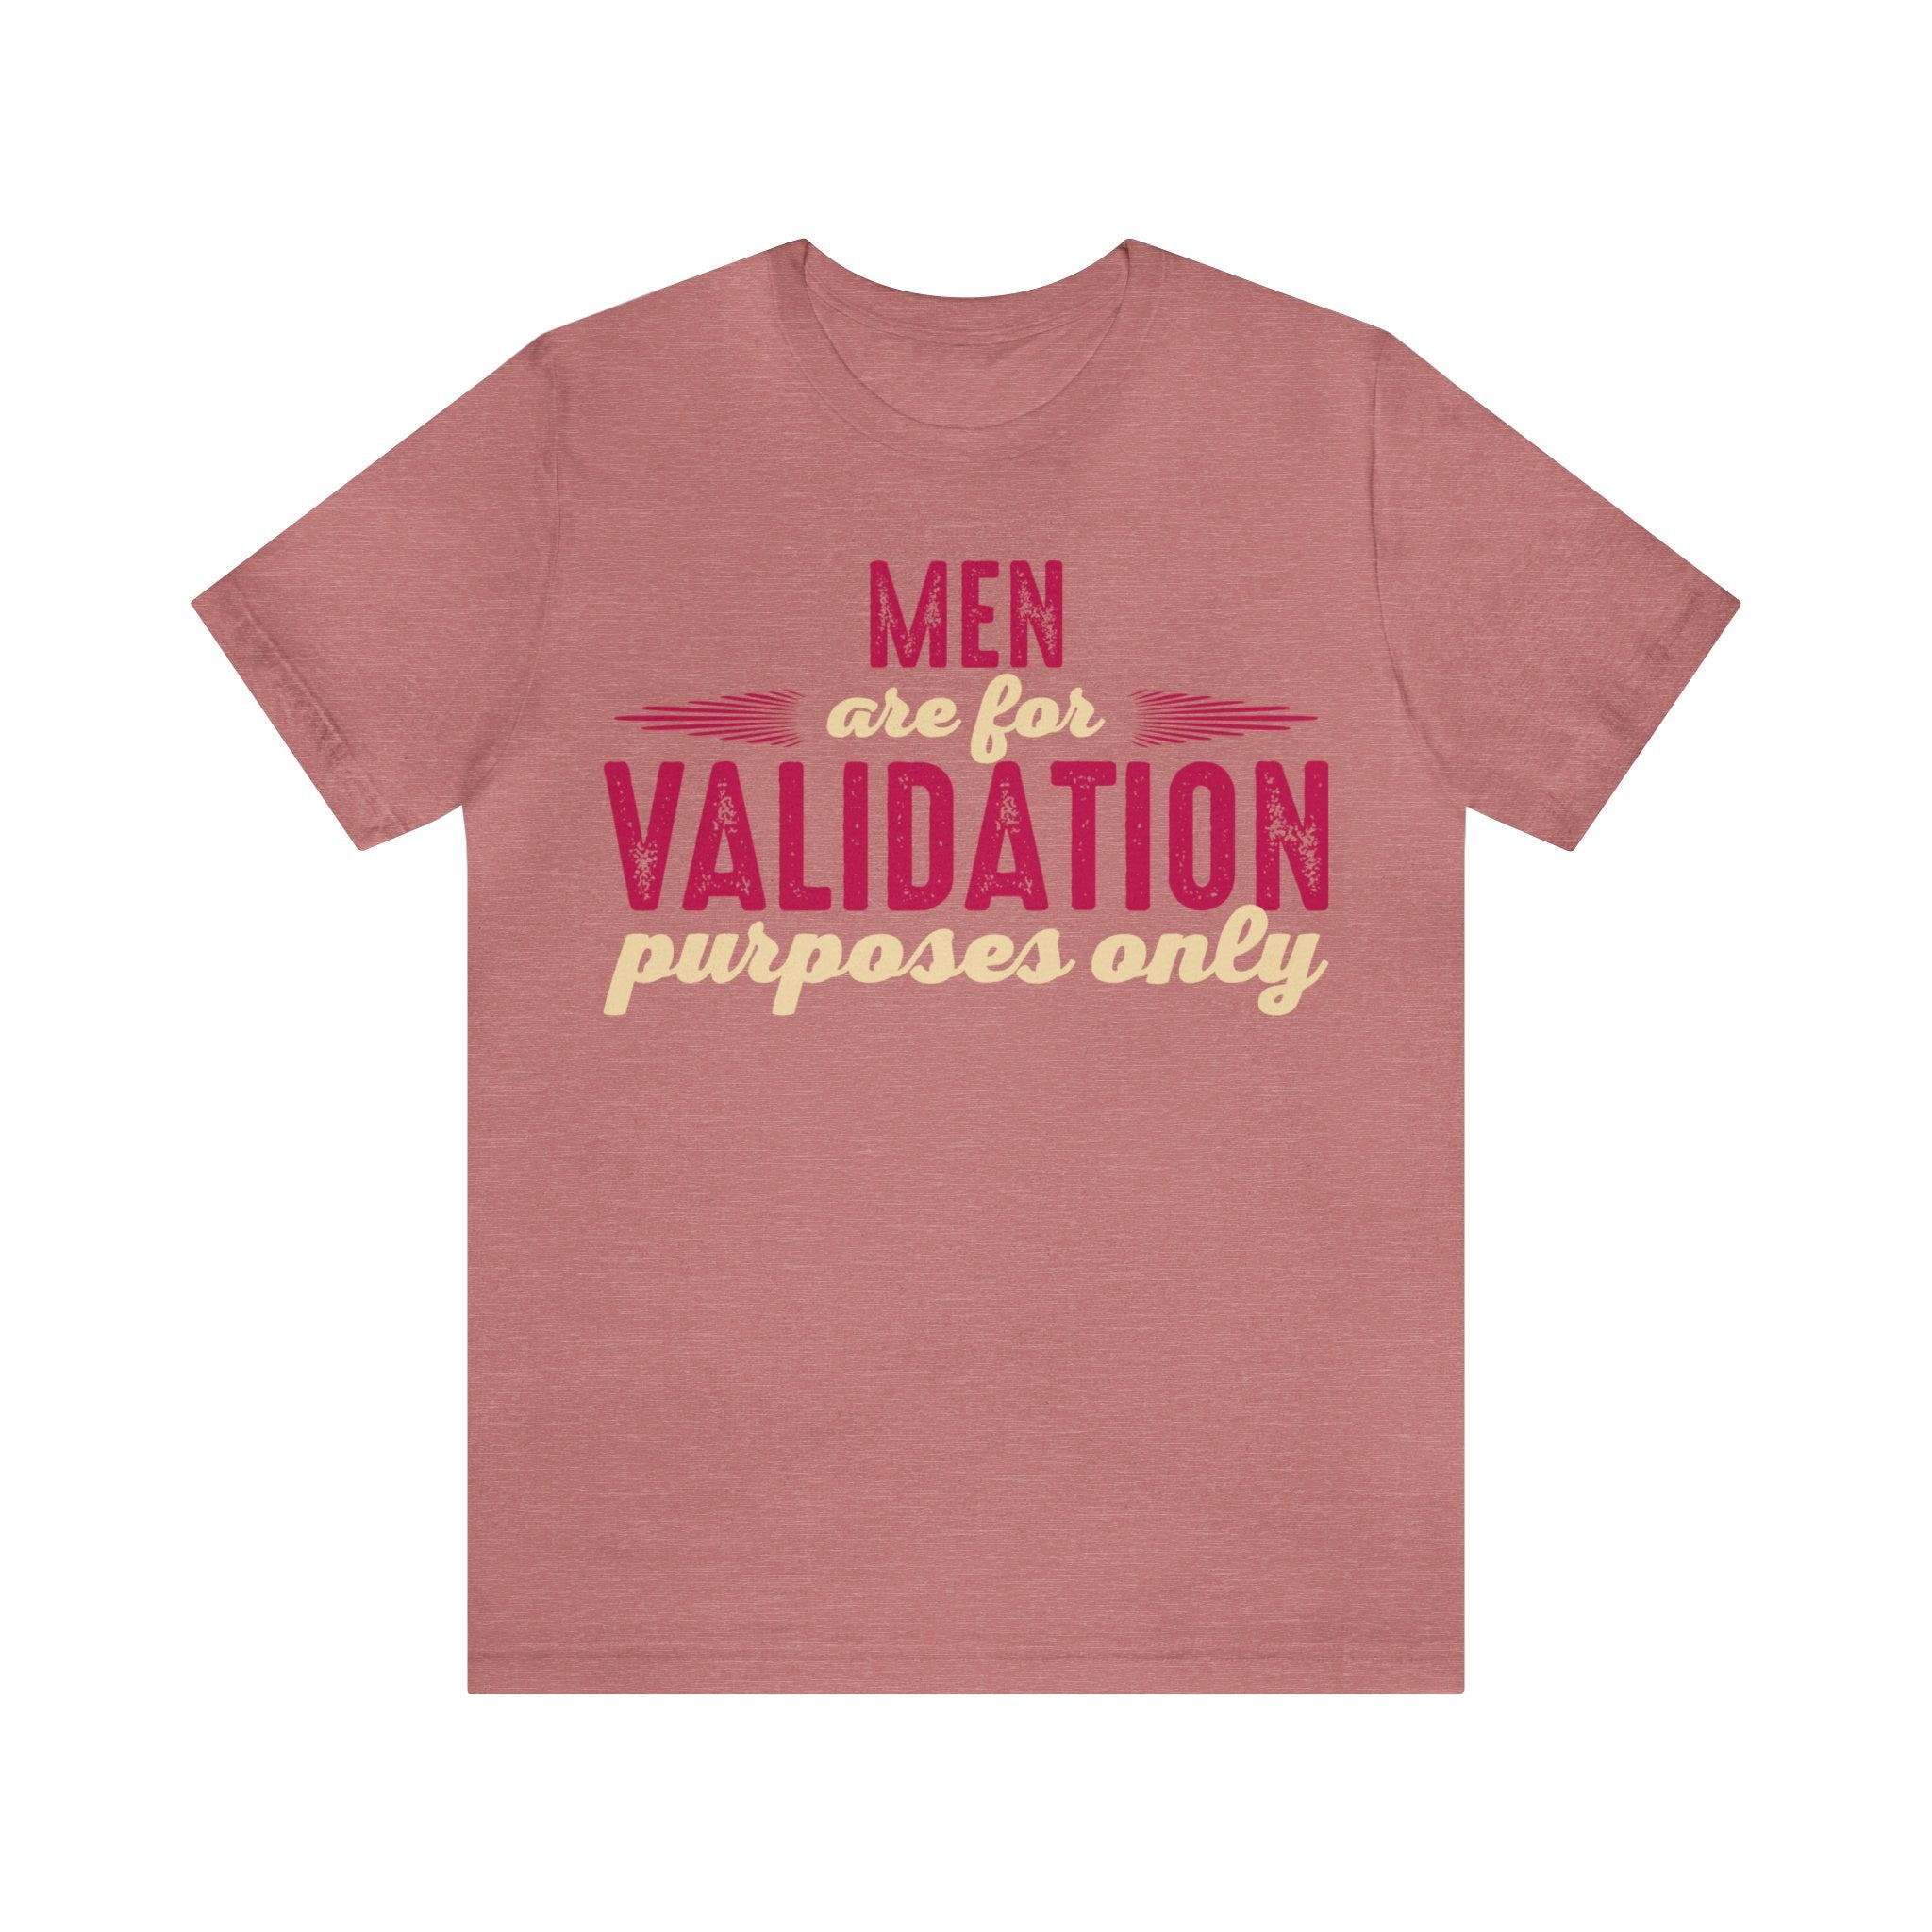 Men are for Validation Purposes Only